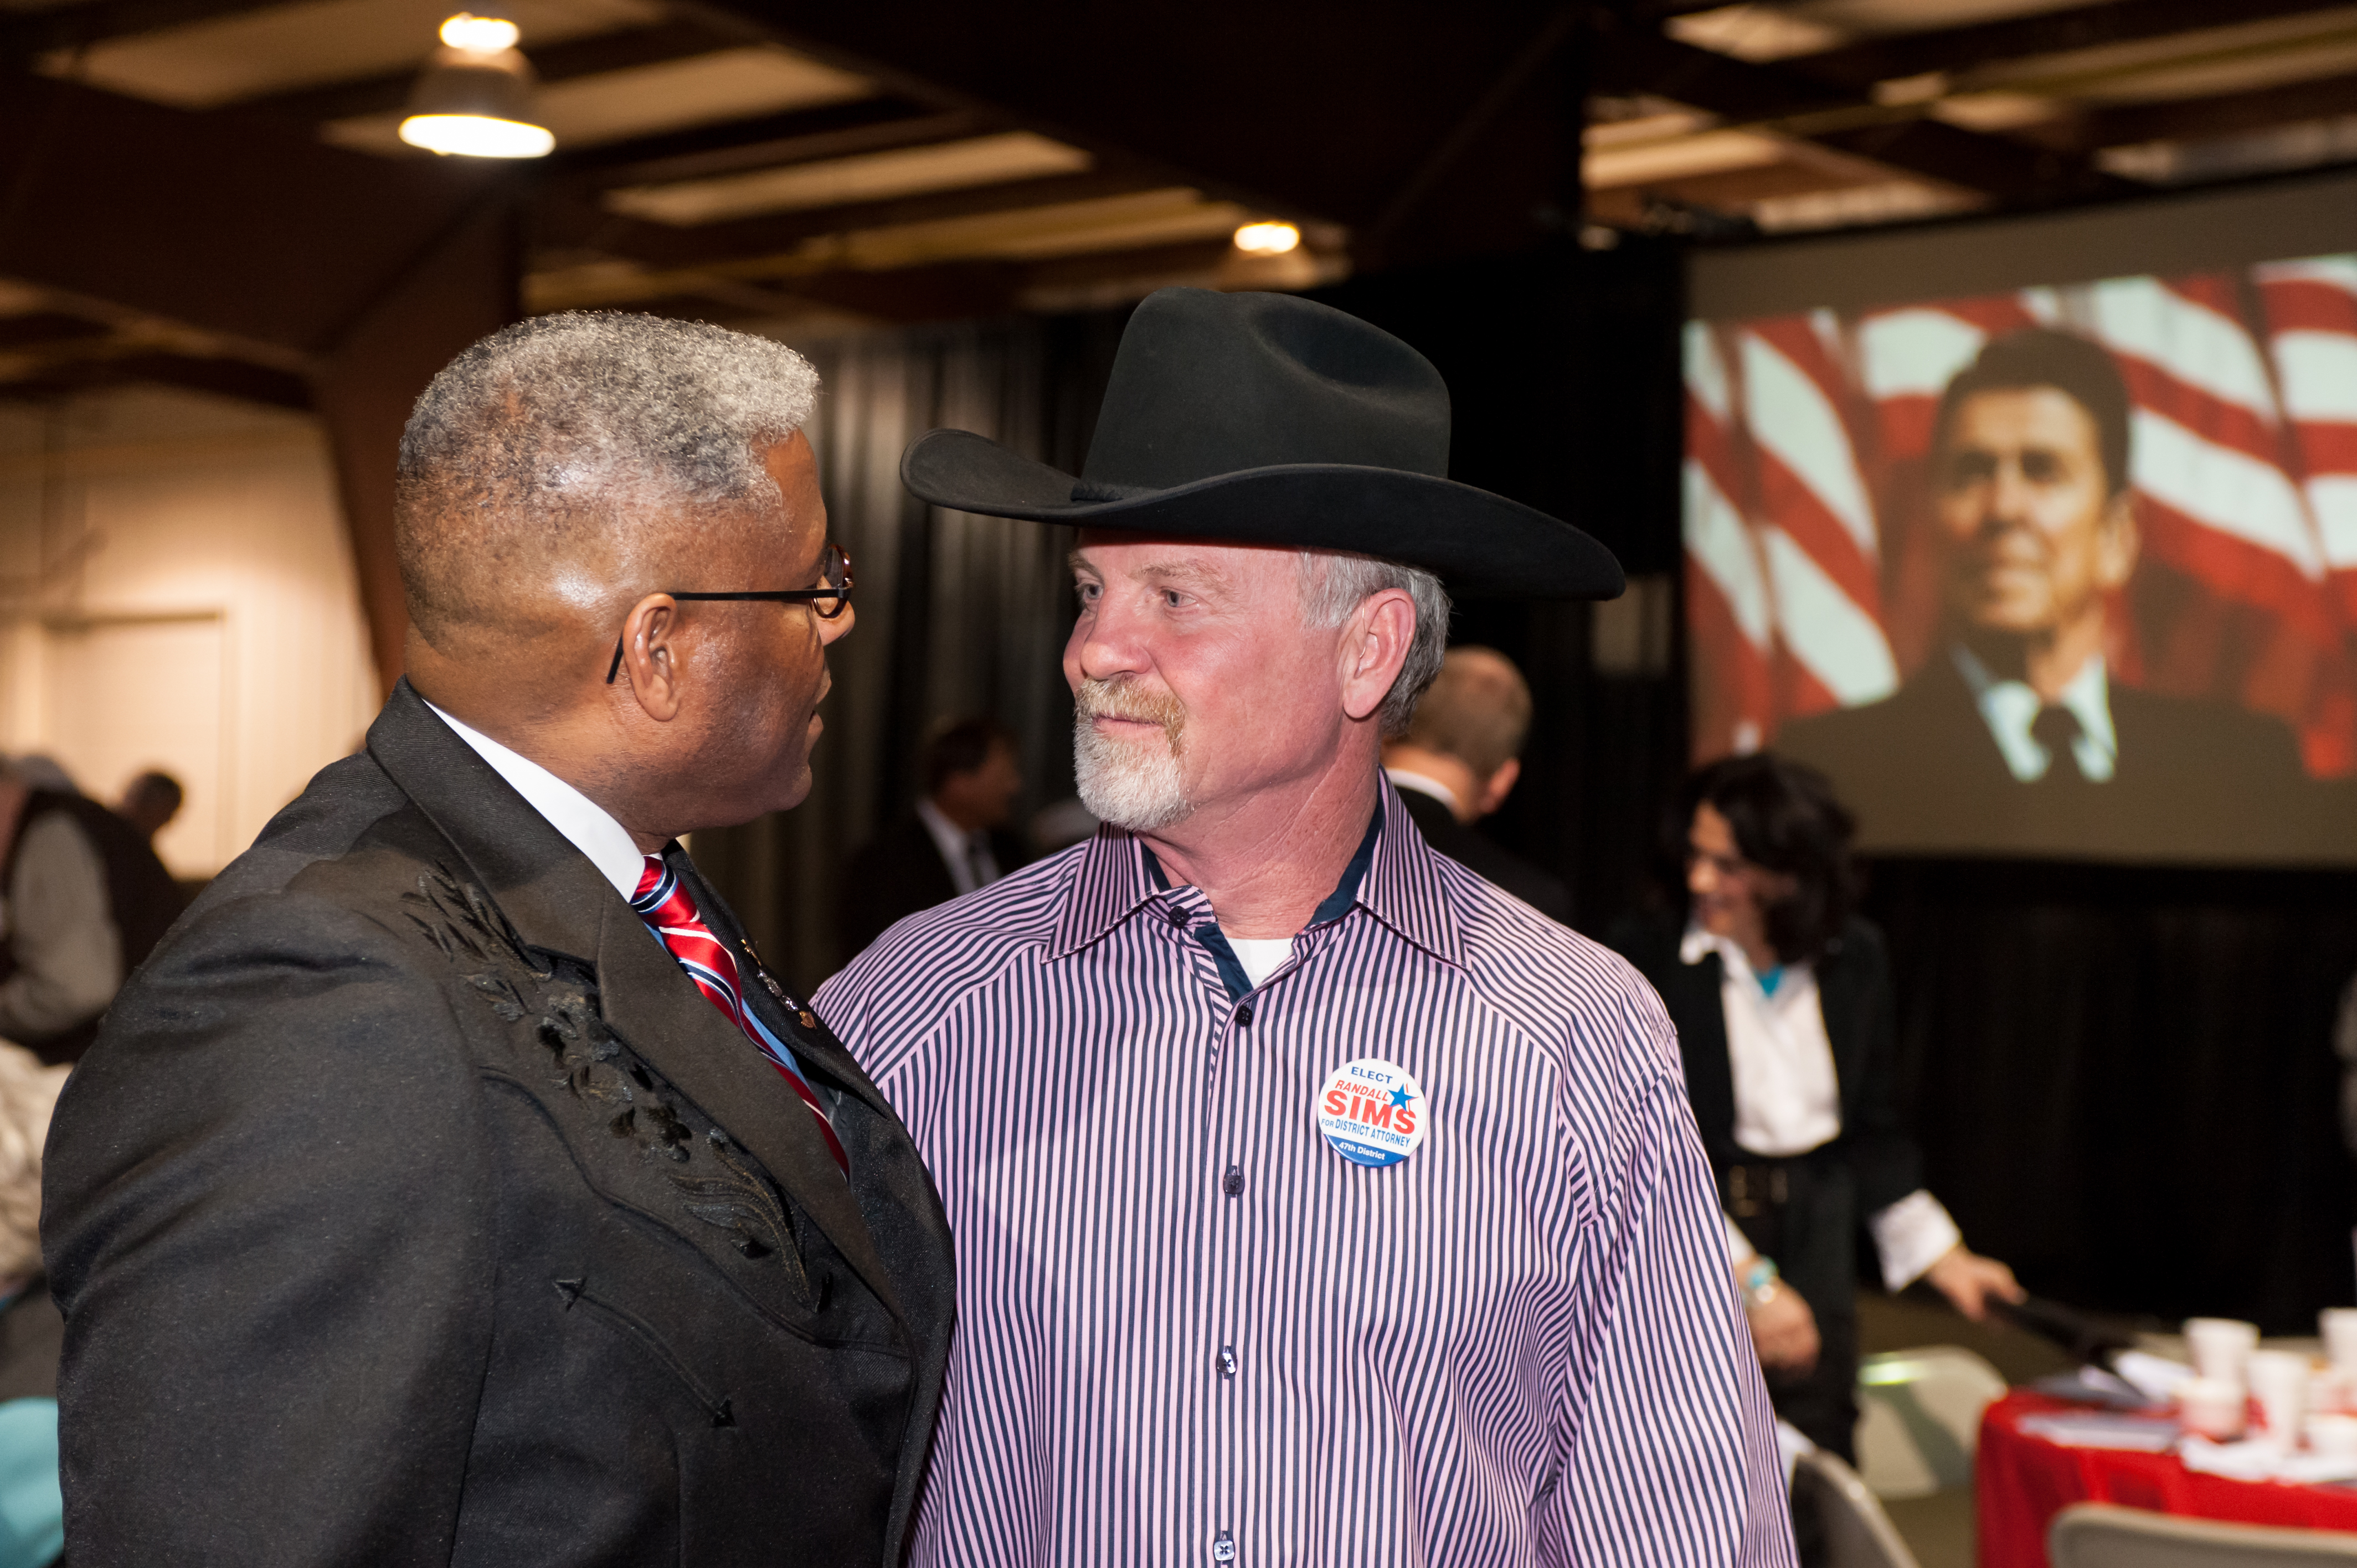 Shaie Williams for AGN Media. Lt. Colonel Allen B West with Randall Sims at the Texas Panhandle Lincoln-Reagan Day Dinner hosted by the local Republican party groups held at The Rex Baxter Building in Amarillo, TX on January 29, 2016